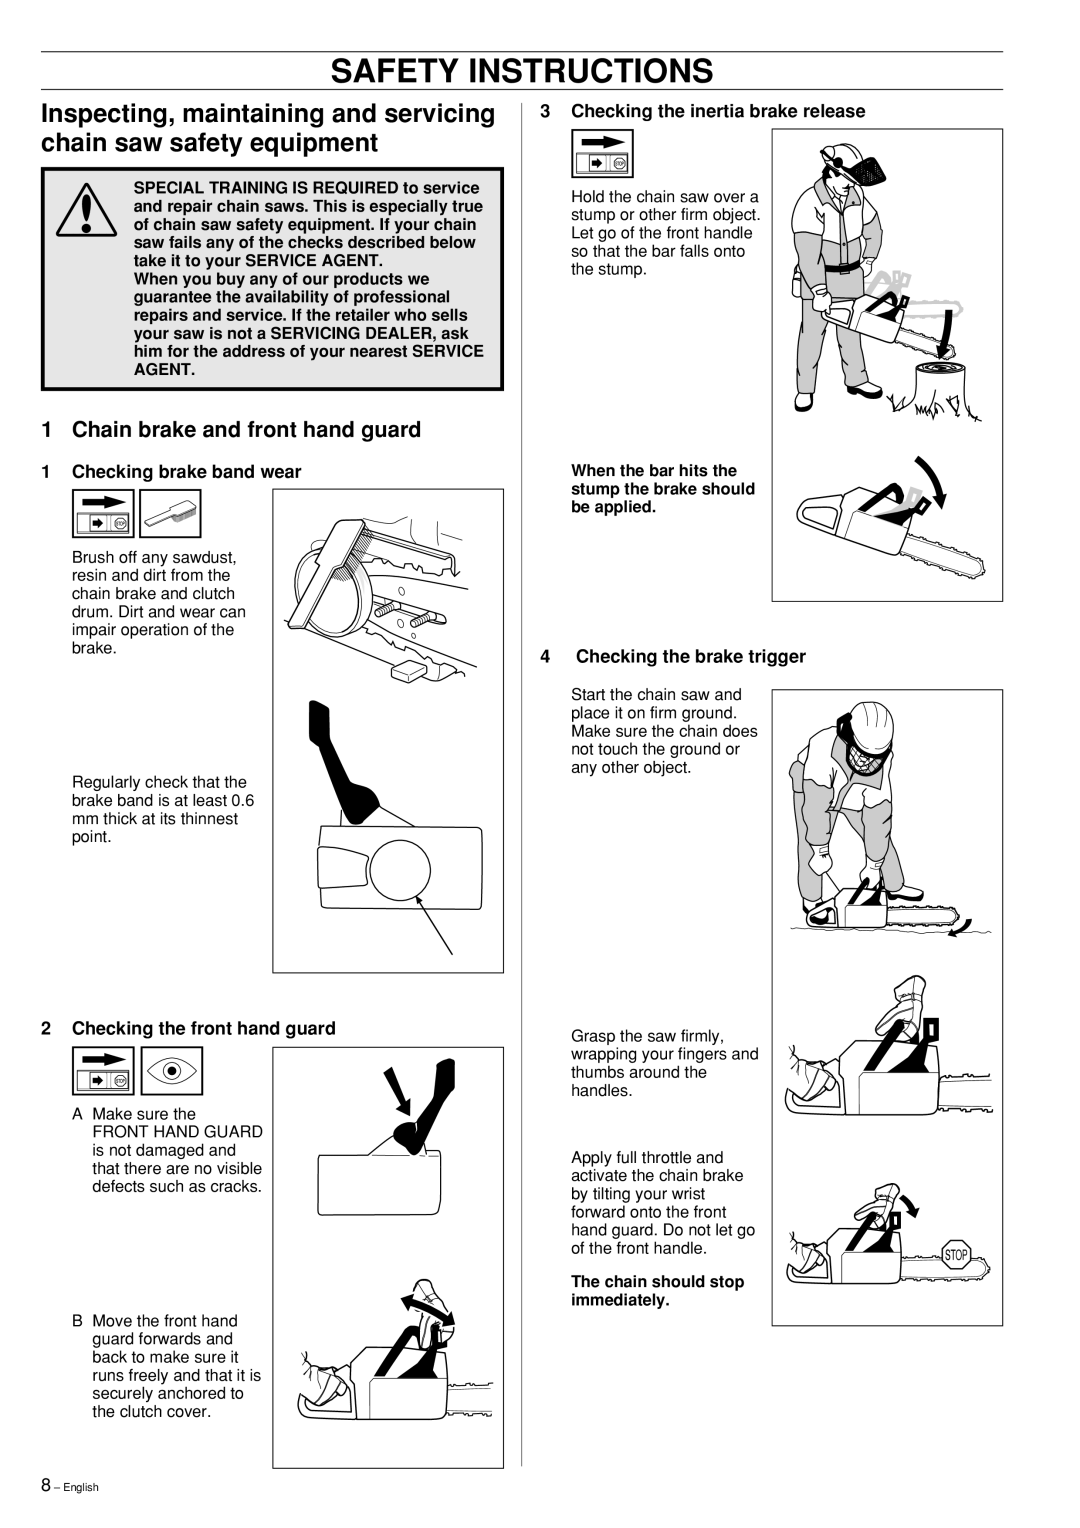 Husqvarna 55 Rancher manual Safety Instructions, Inspecting, maintaining and servicing chain saw safety equipment 